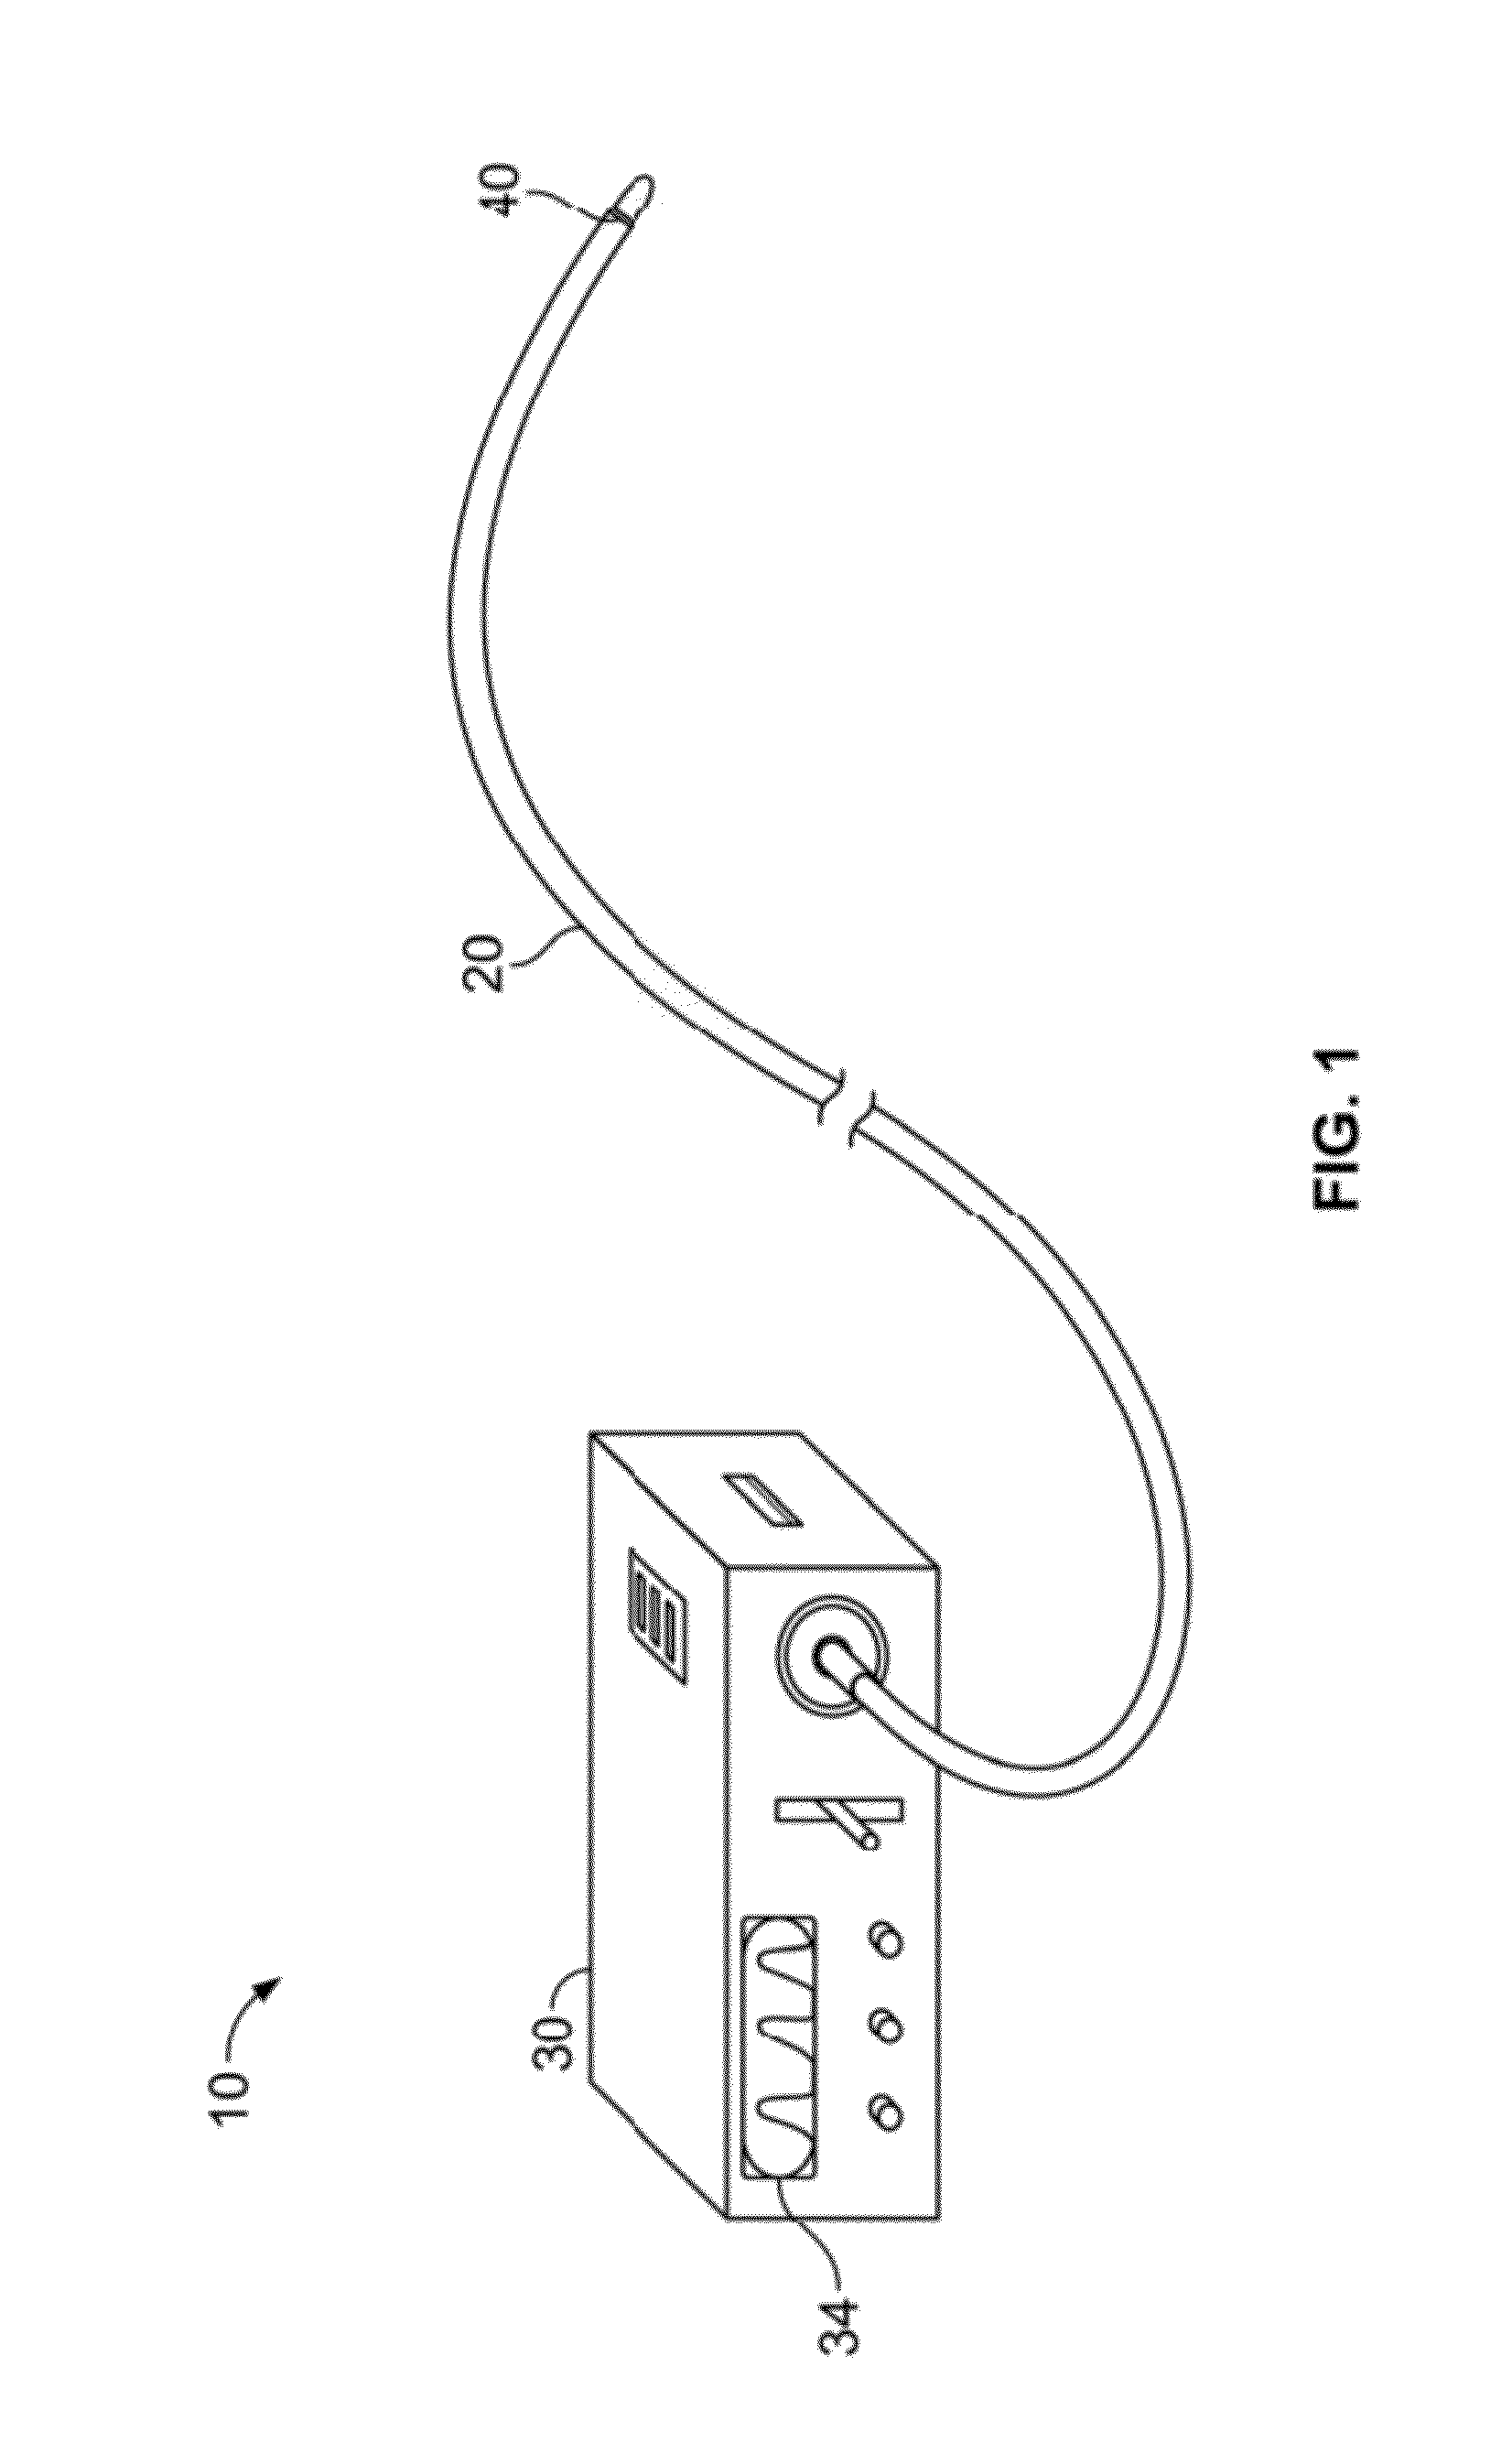 Method and system for measuring pulmonary artery circulation information